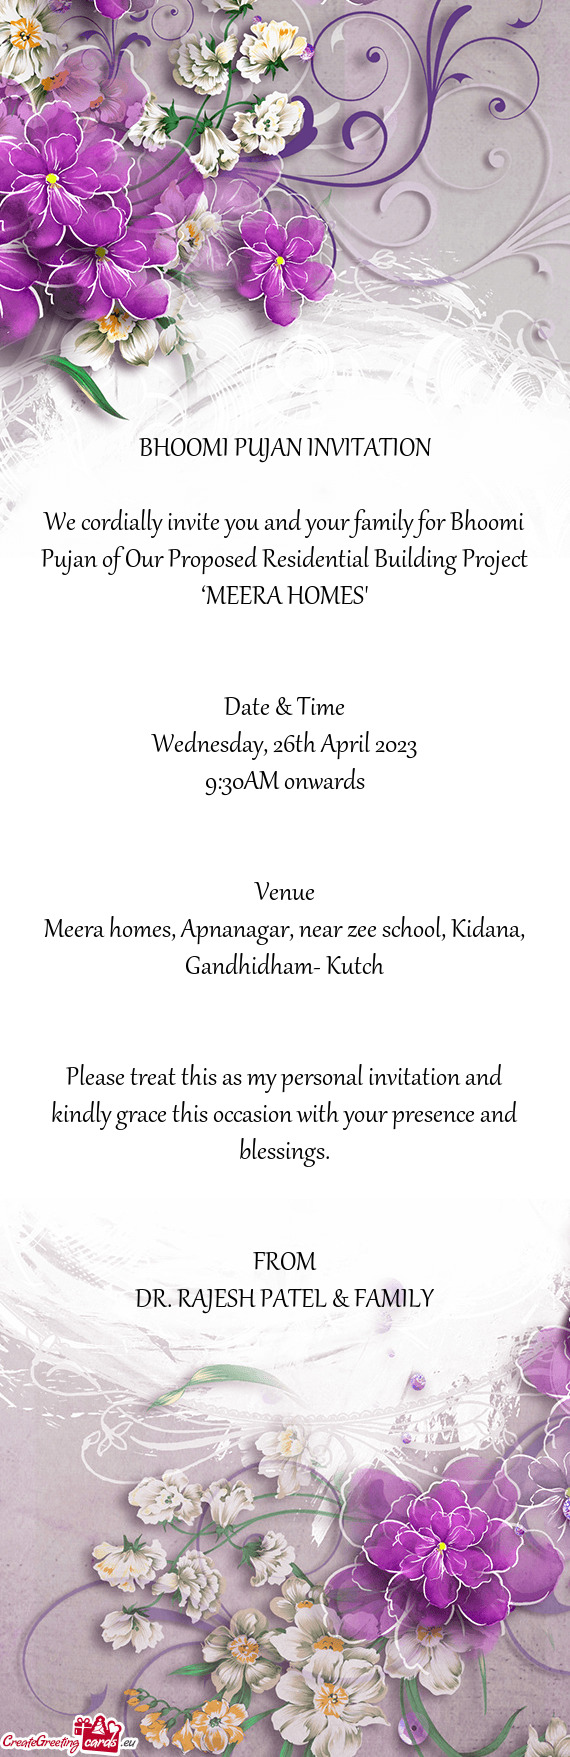 BHOOMI PUJAN INVITATION We cordially invite you and your family for Bhoomi Pujan of Our Proposed